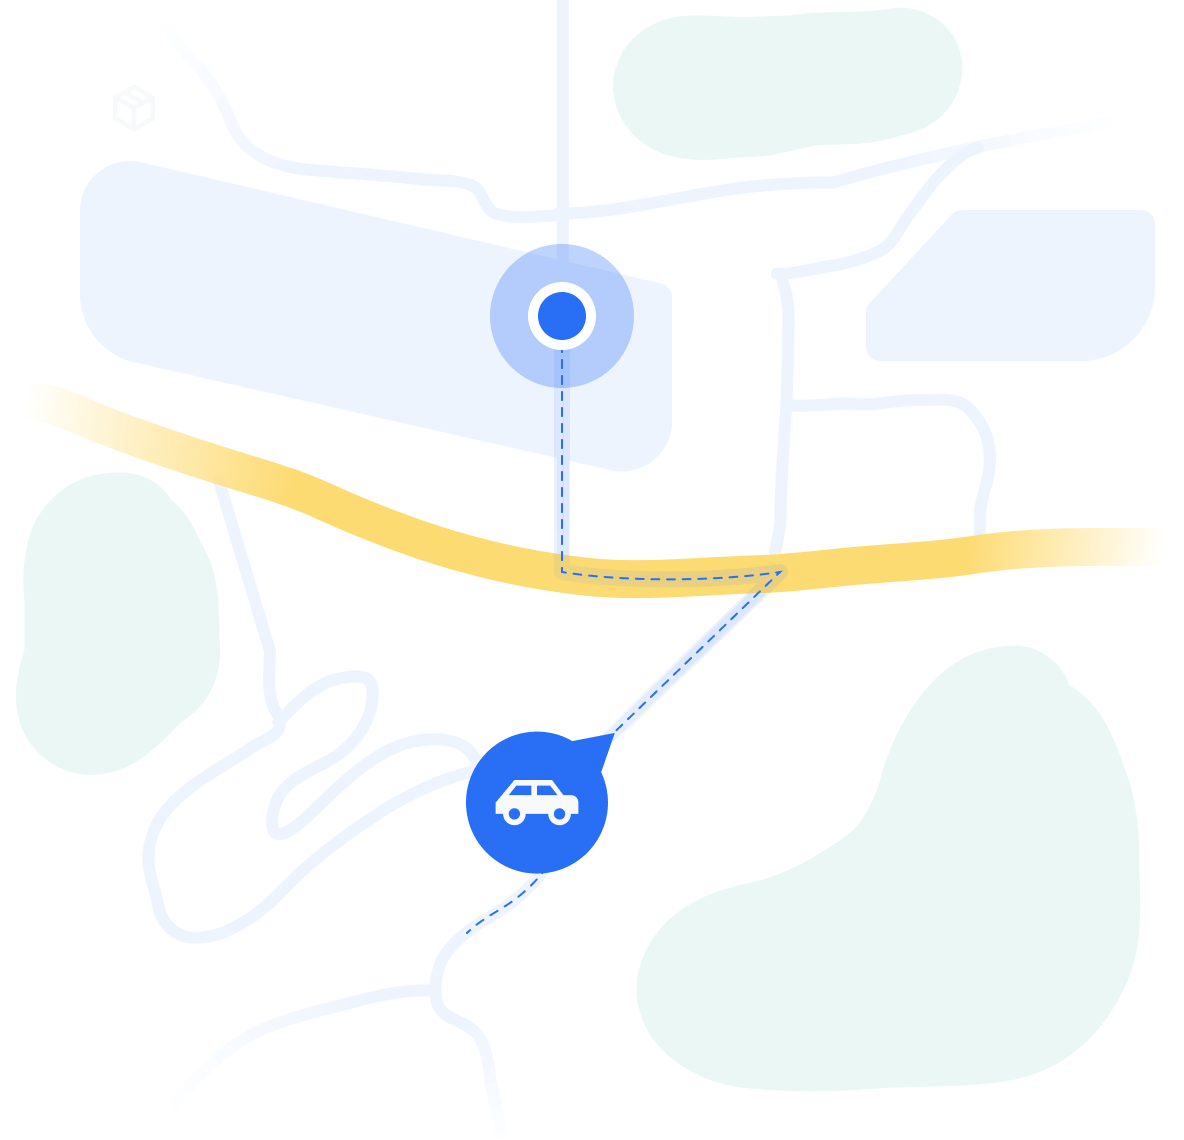 Abstract map graphic depicting a car icon following a dotted line towards a destination marker